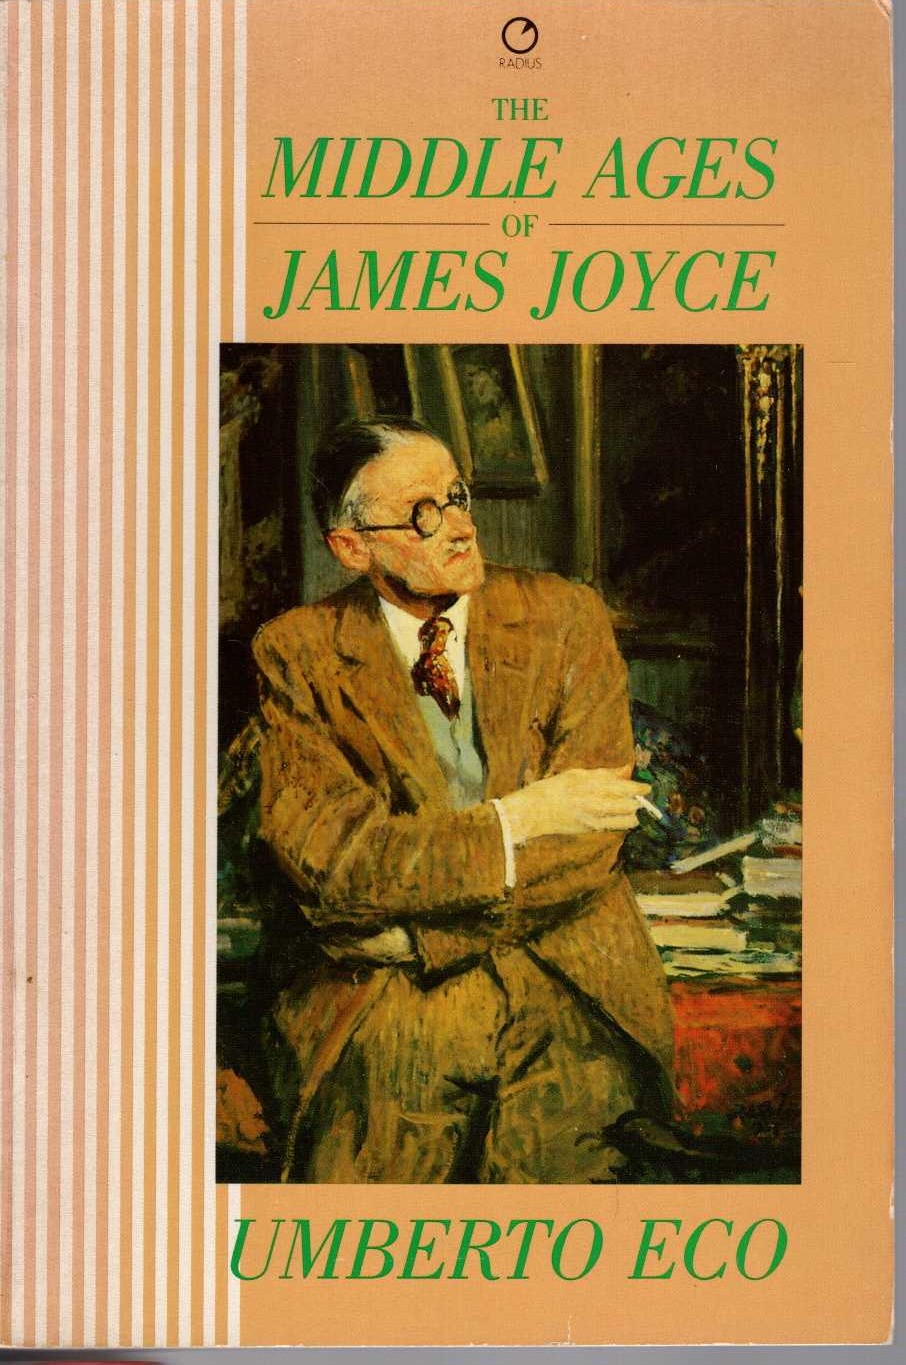 (Umberto Eco) THE MIDDLE AGES OF JAMES JOYCE front book cover image